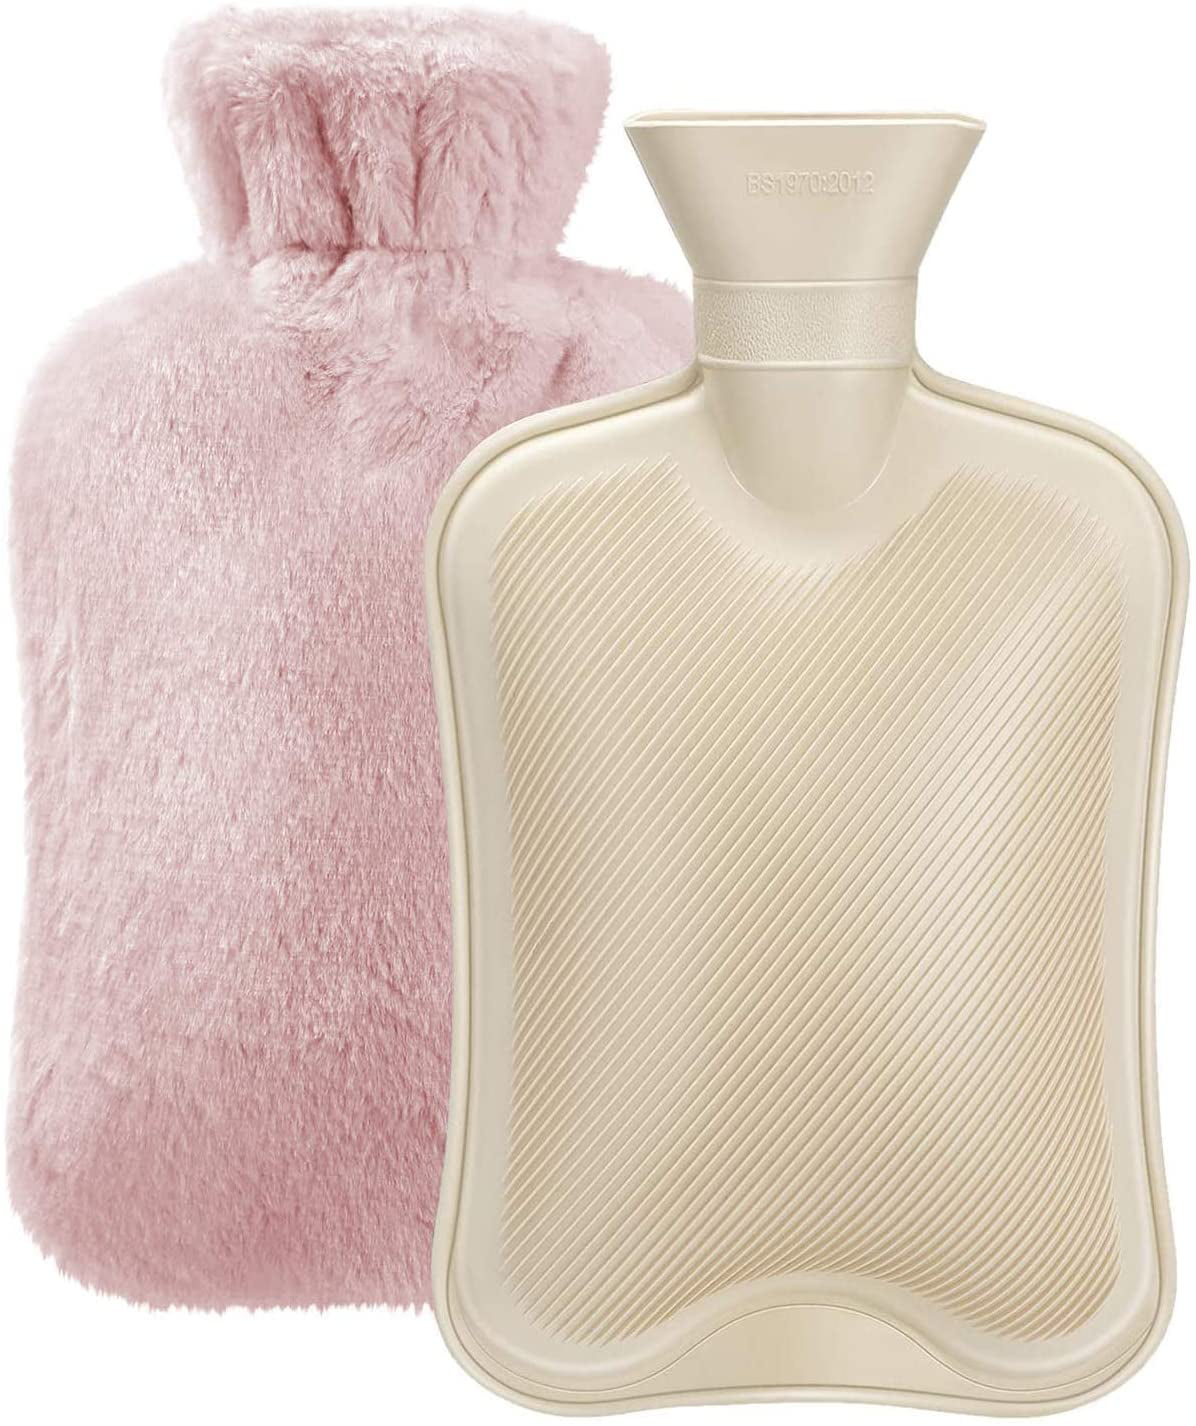 Handy Solutions Rubber Hot Water Bottle for Pain Management, 2 qt Capacity